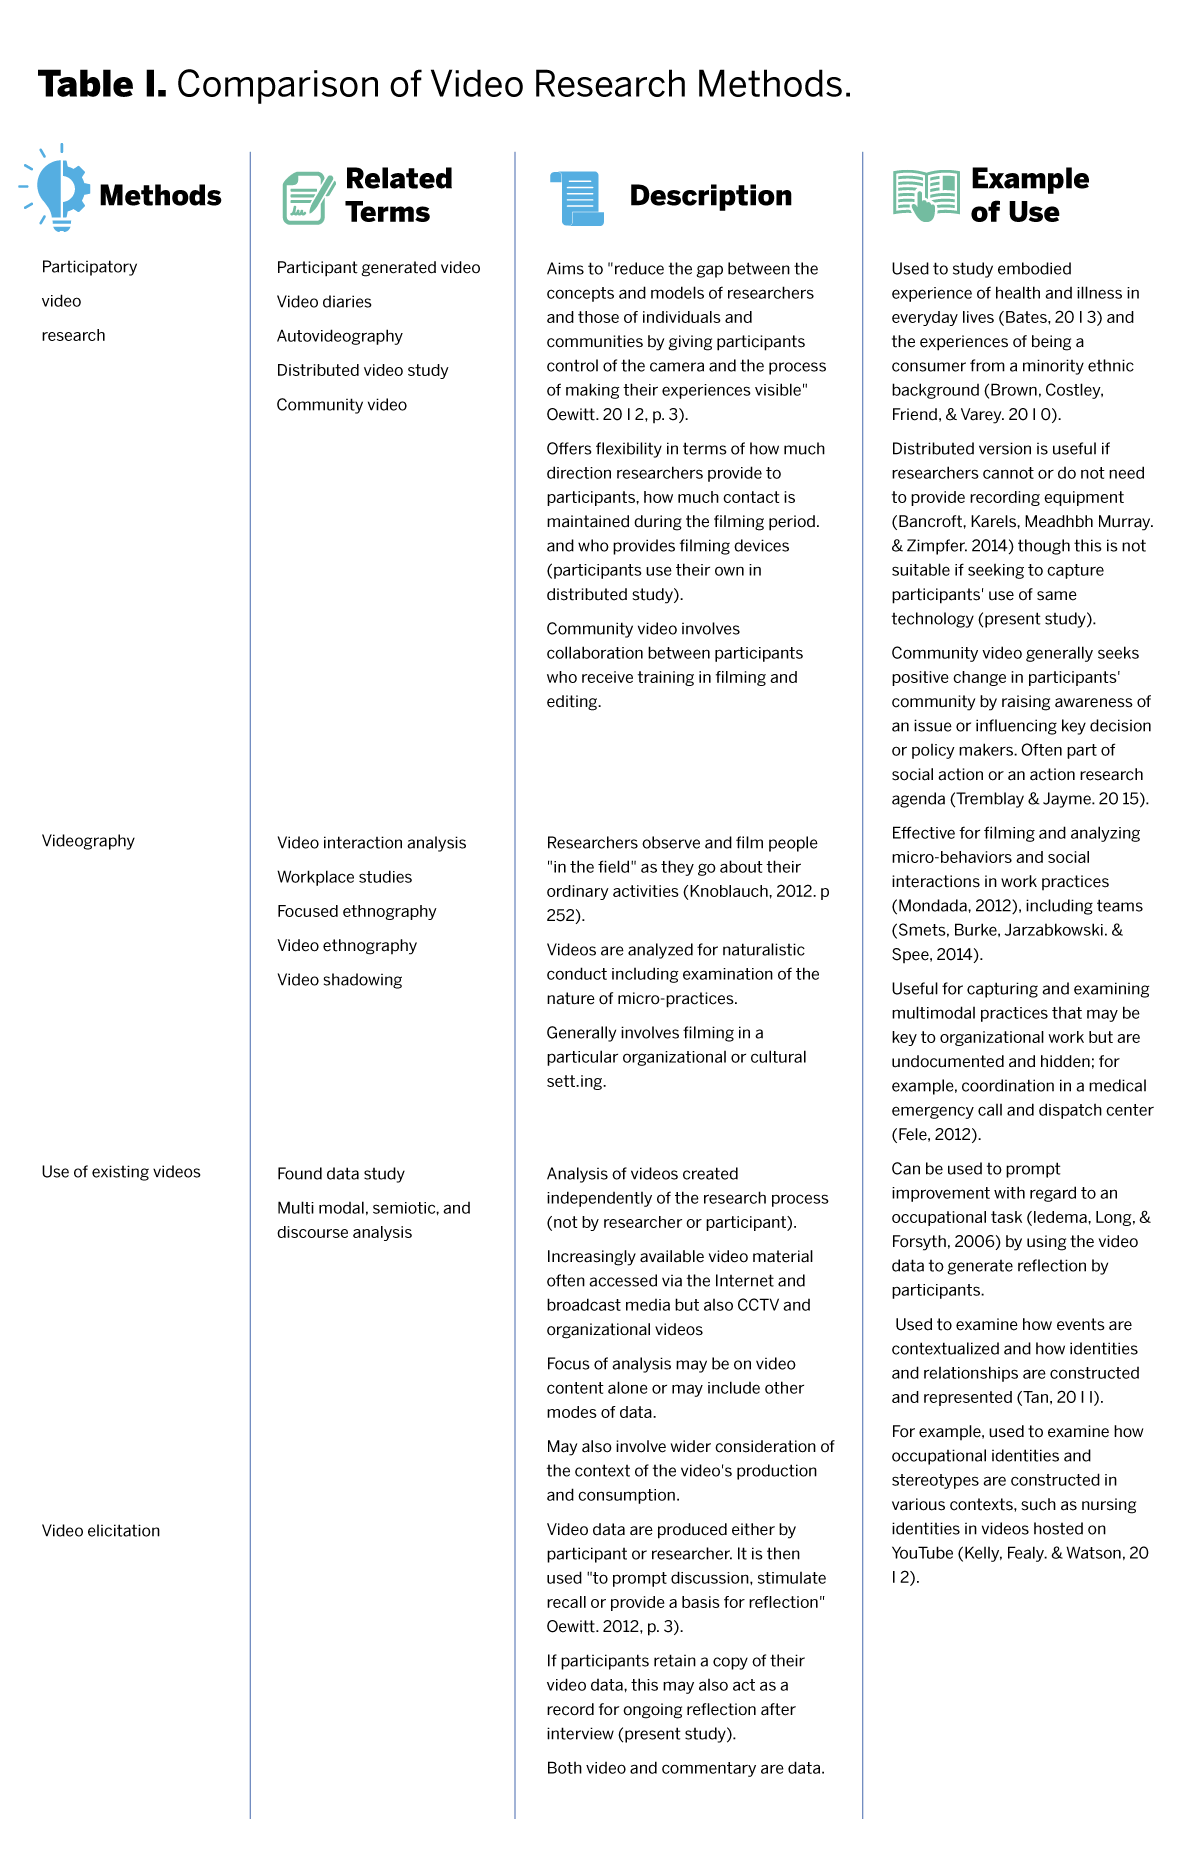 Comparison of video research methods